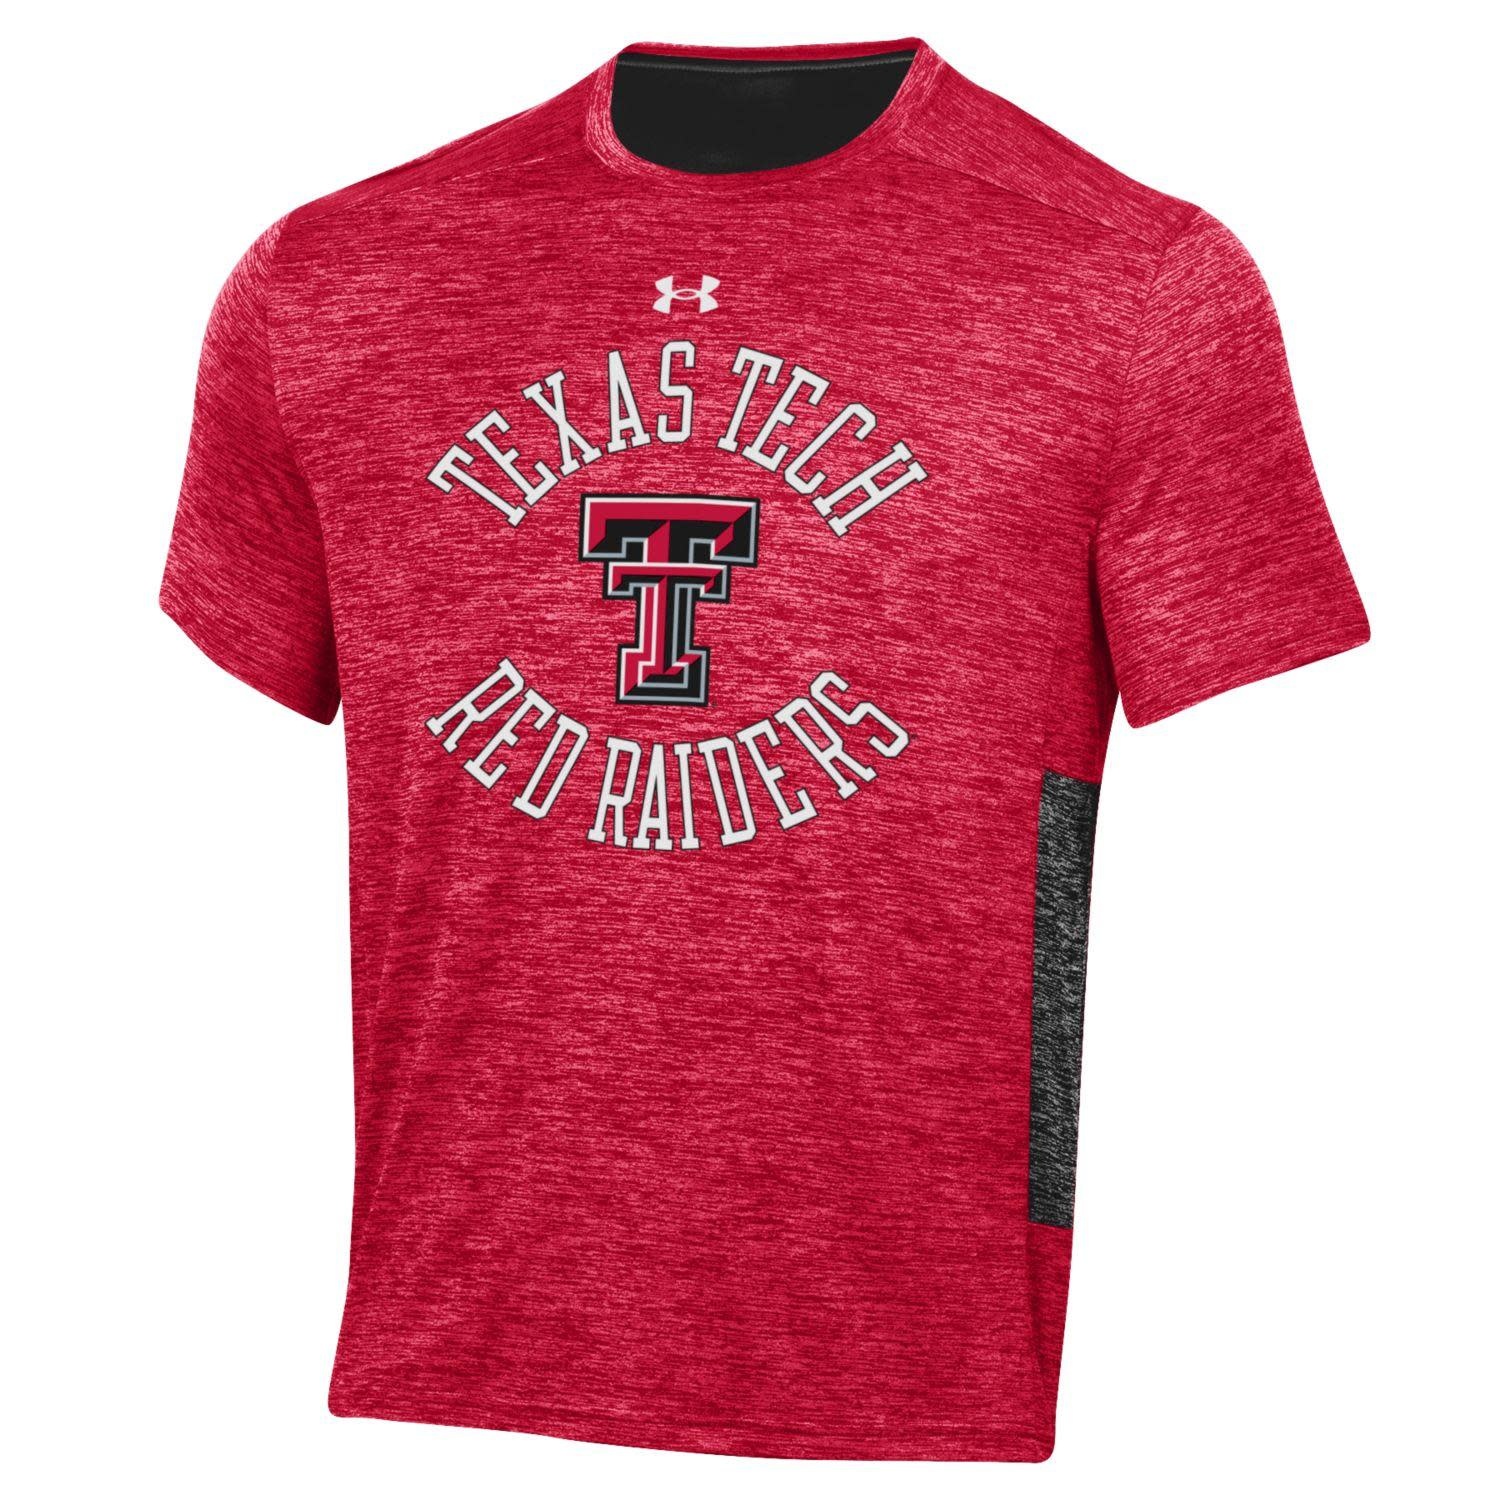 Under Armour Tech Twist T-shirt Short Sleeves in Red